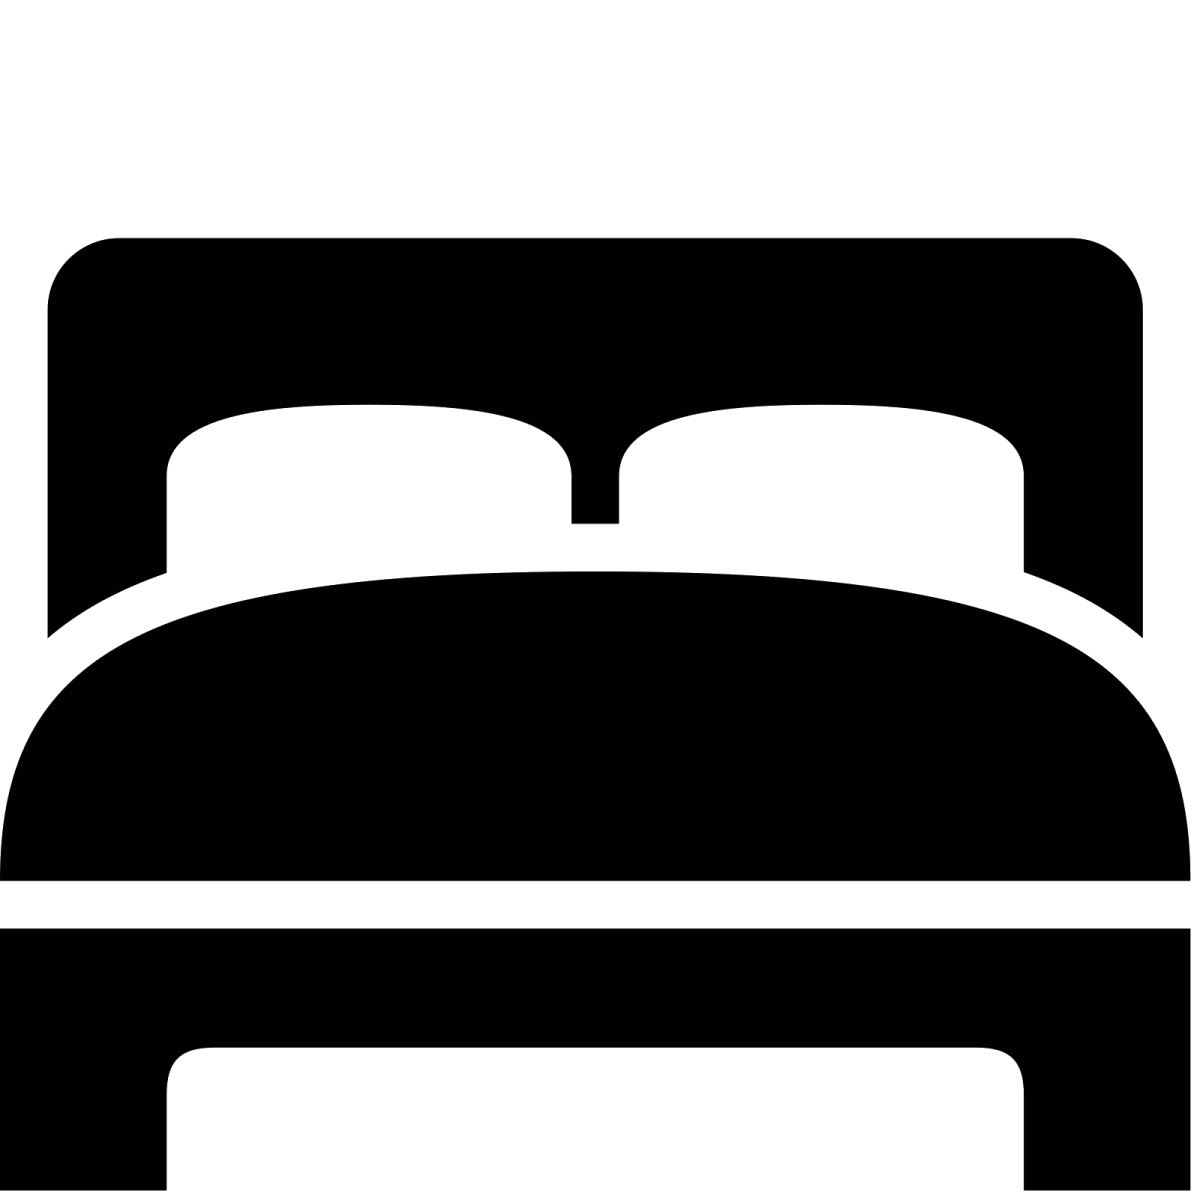 /files/images/bed-icon-png-299677-free-icons-library-bed-icon-png-1600_1600.jpg